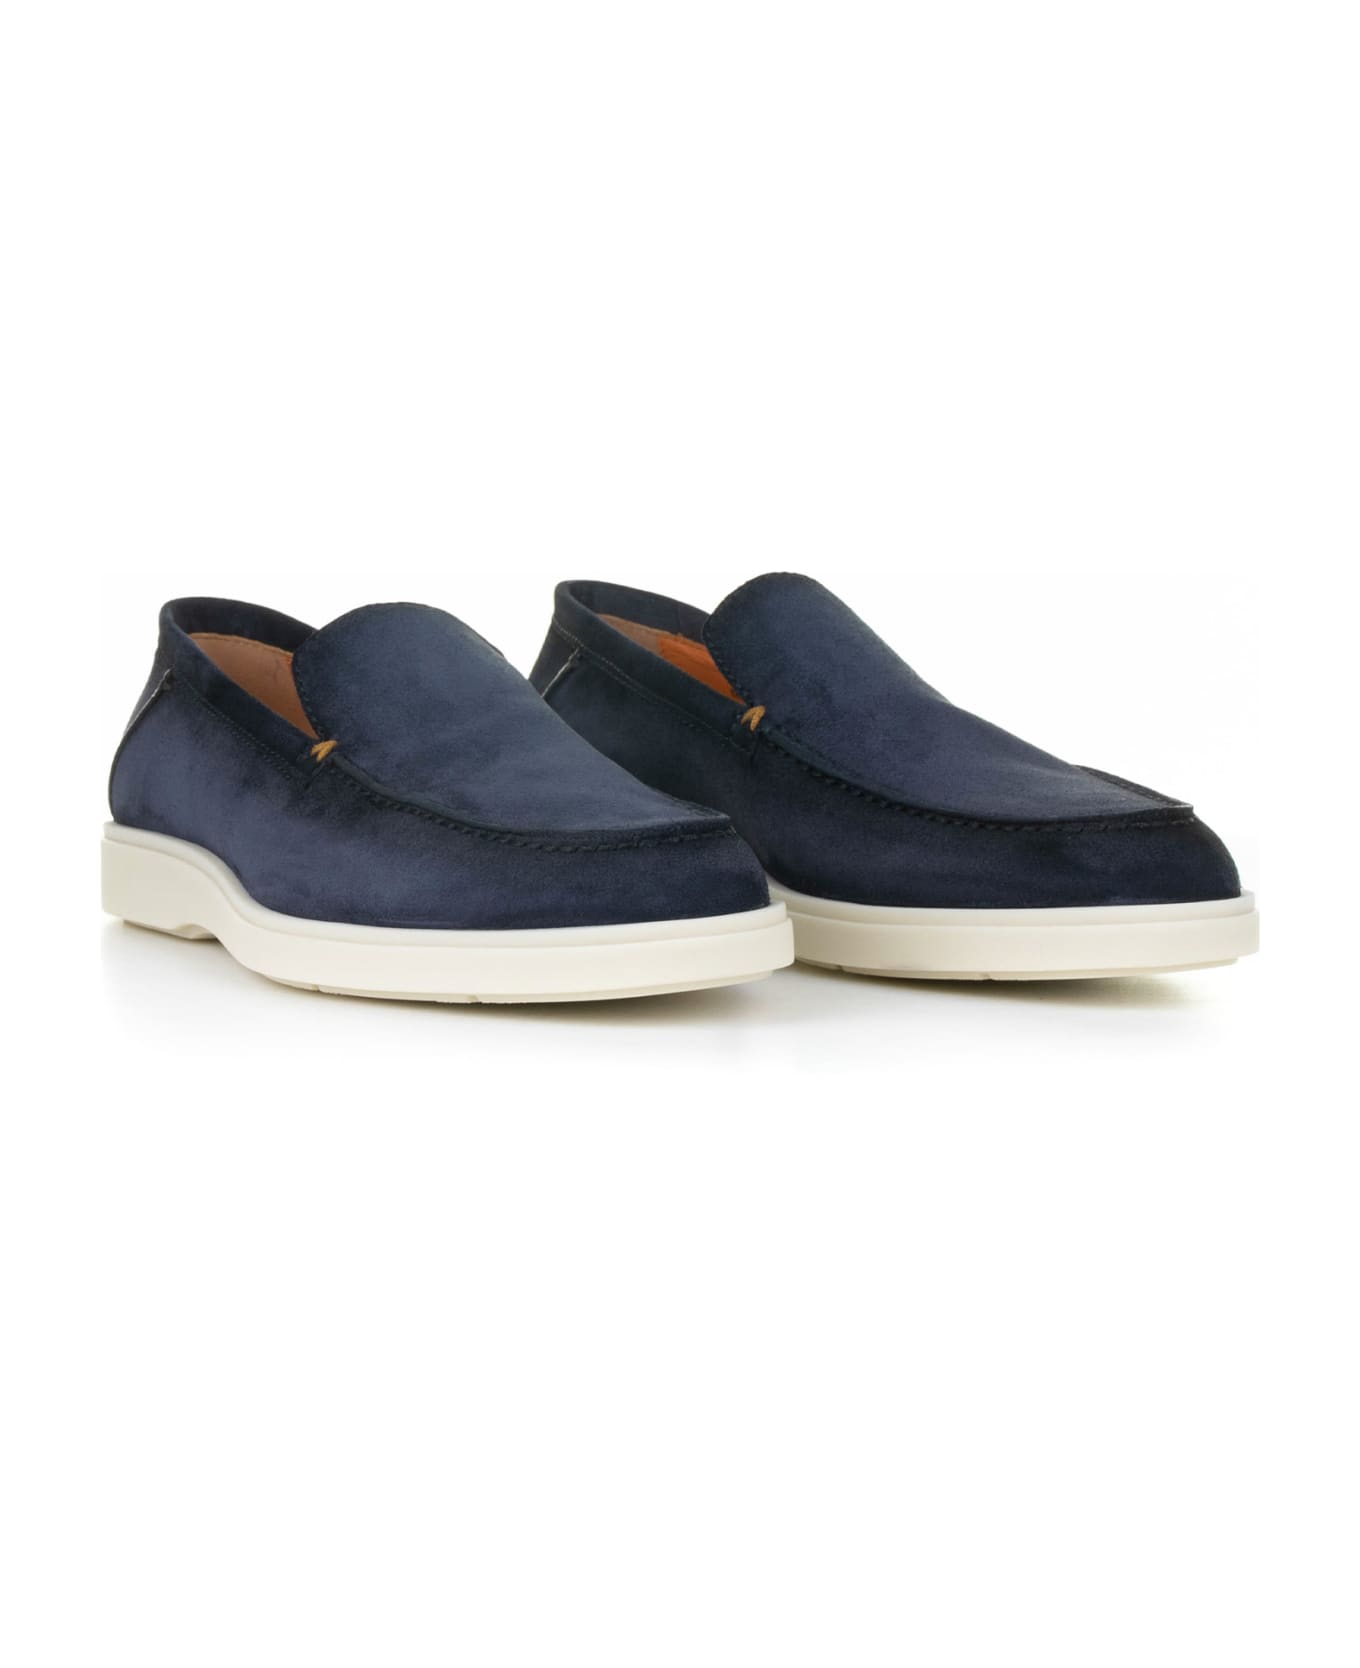 Santoni Moccasin In Blue Suede And Rubber Sole - BLUE